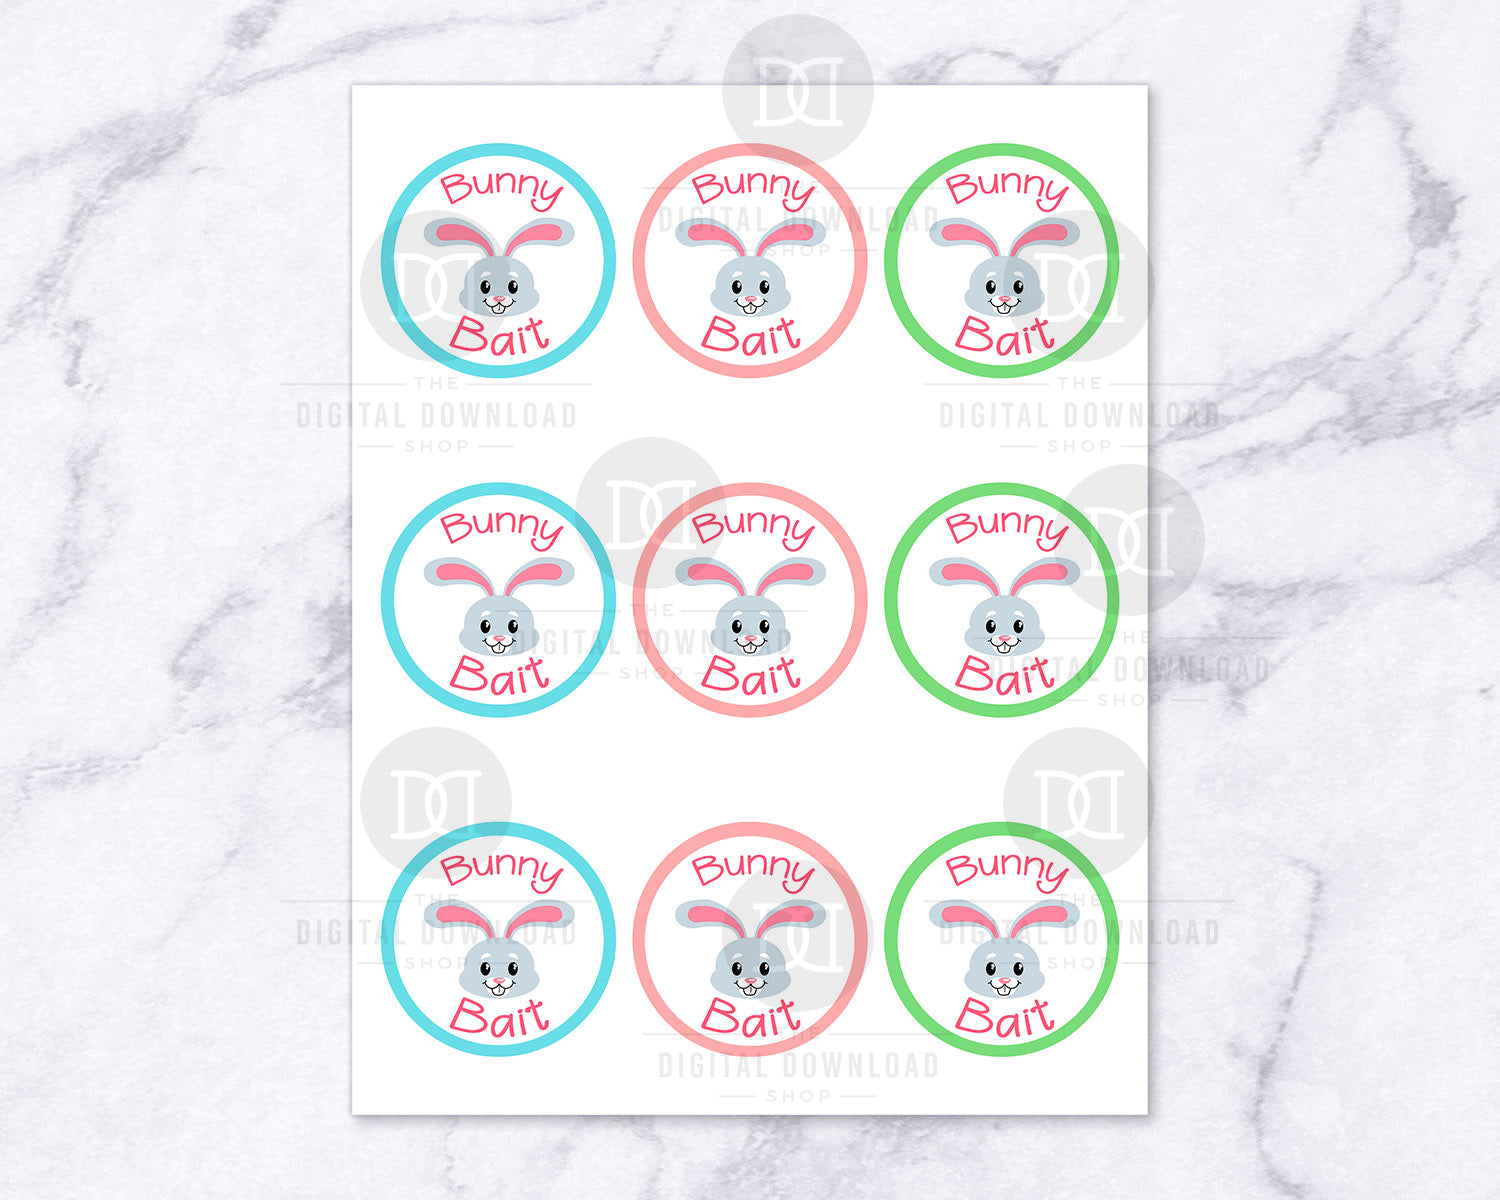 Bunny Bait Stickers Printable | The Digital Download Shop